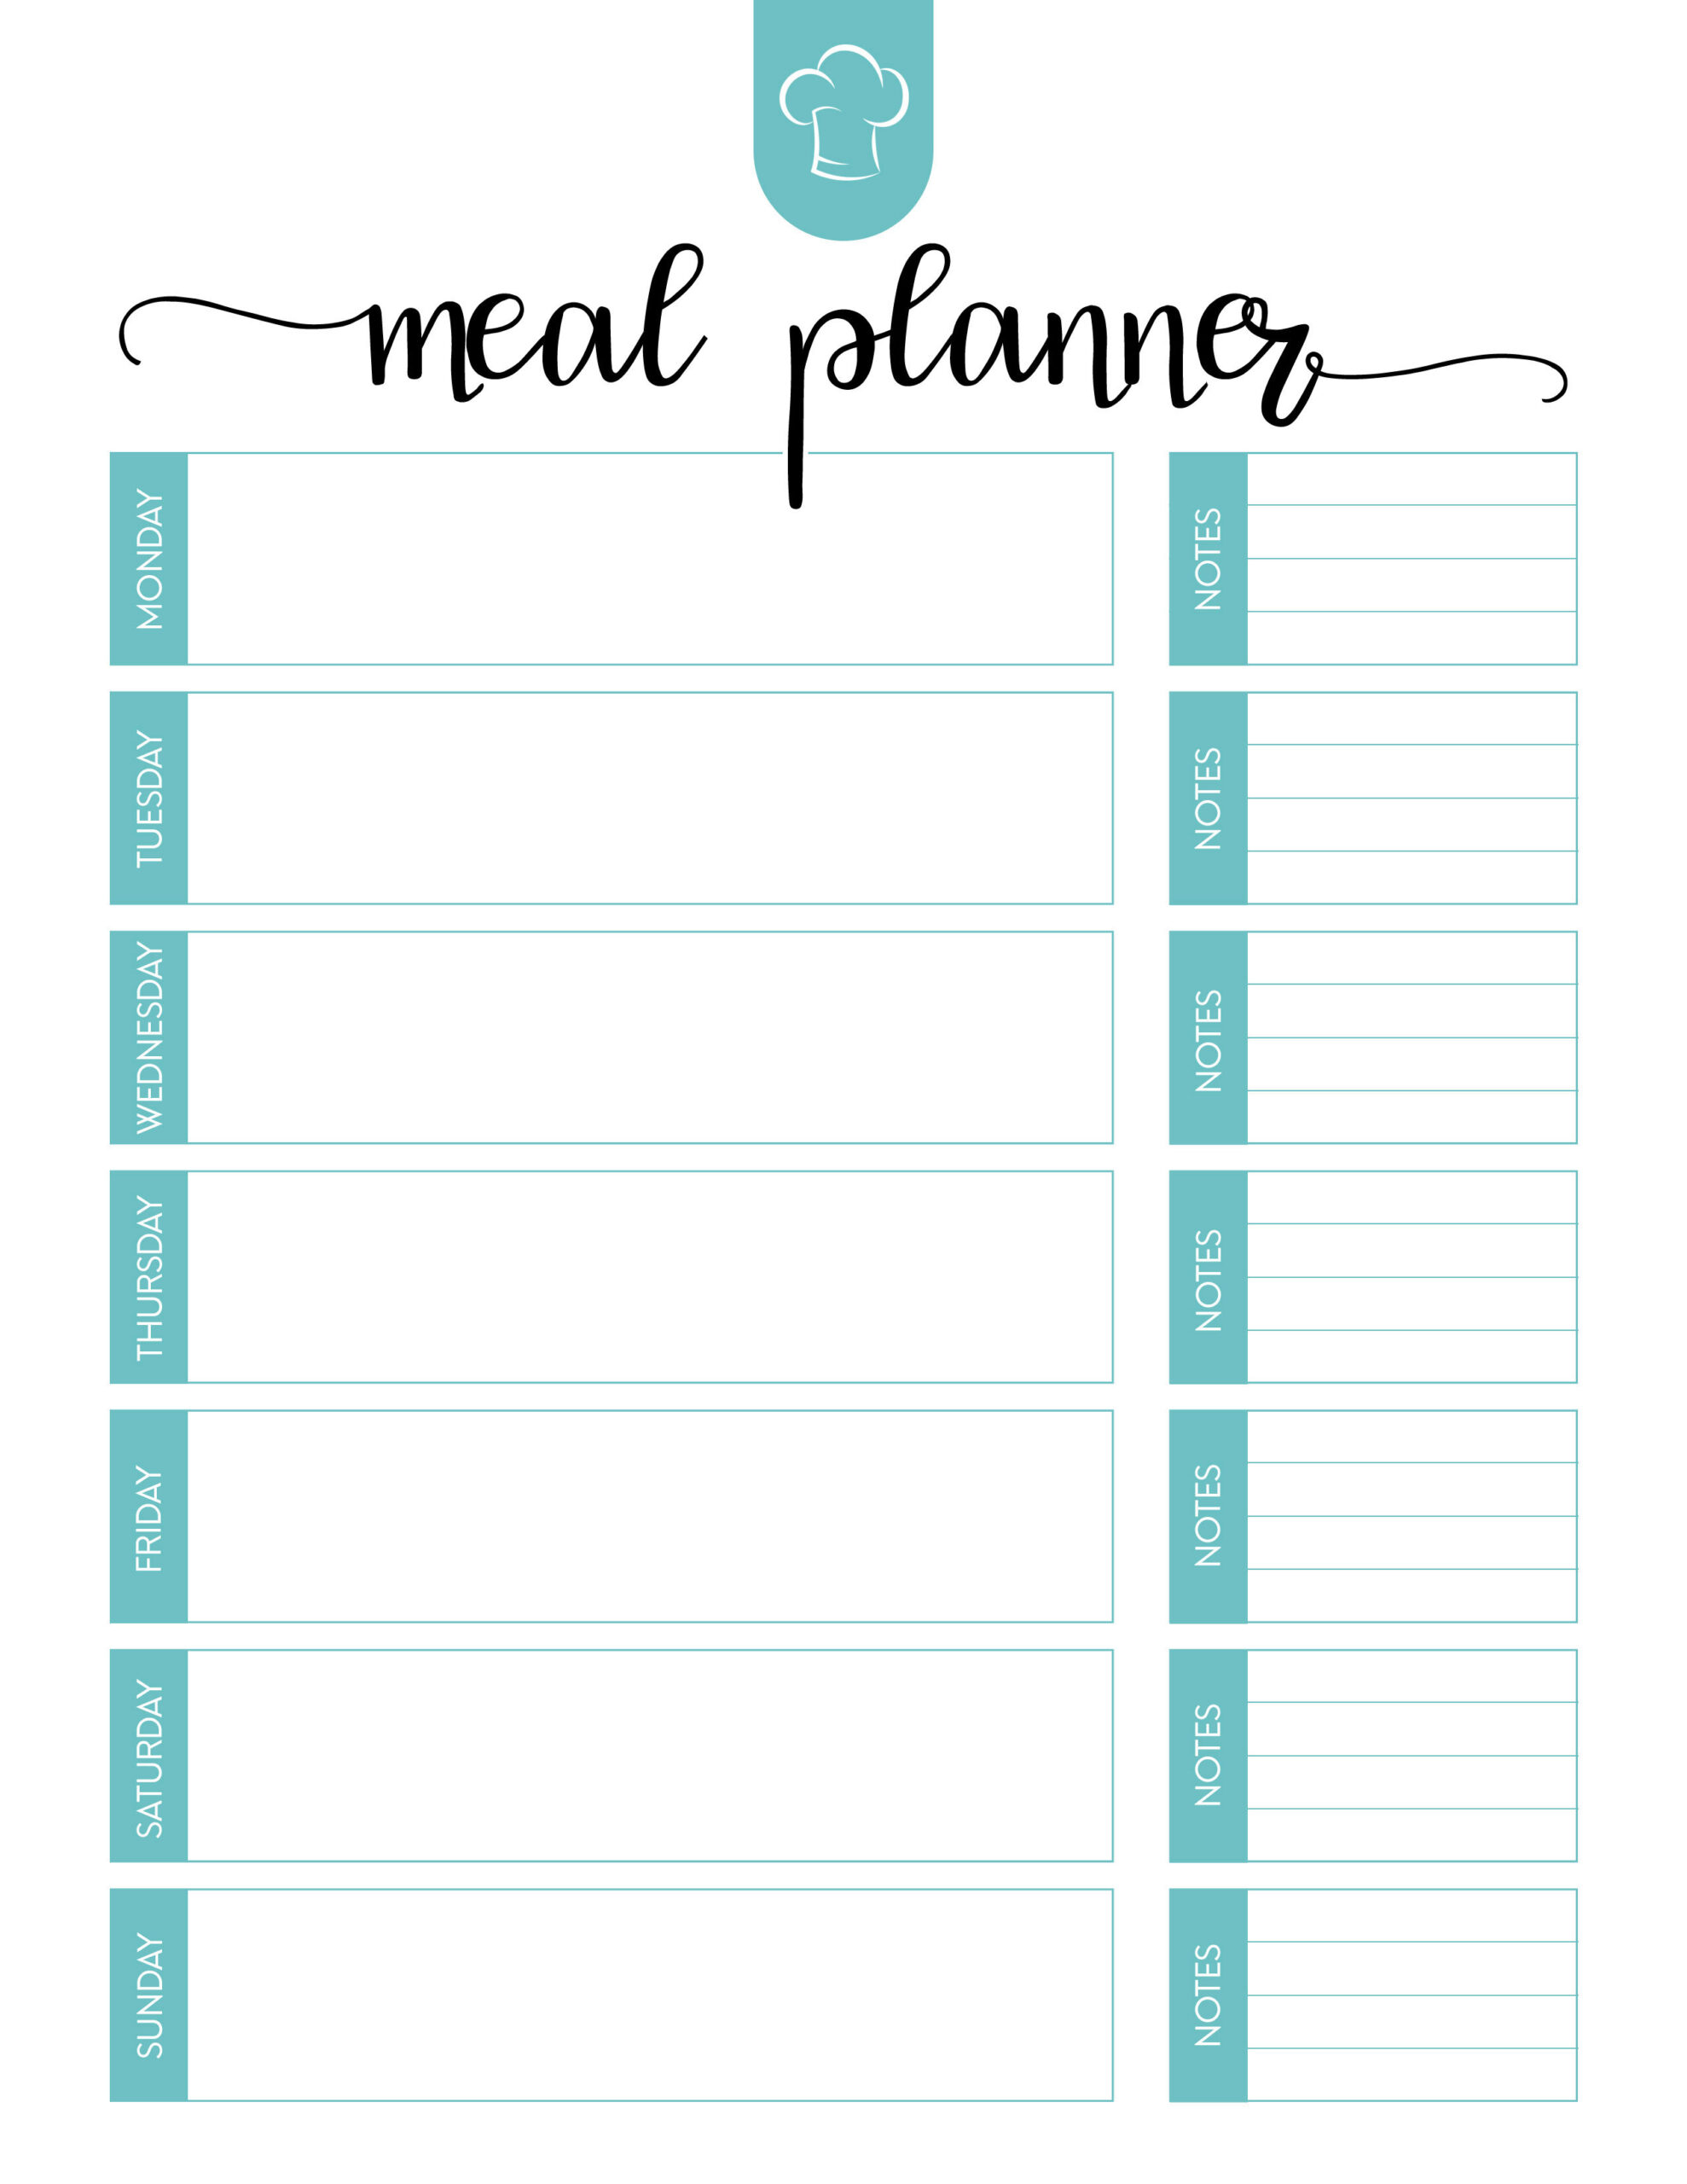 Free Printable Meal Planner Set - The Cottage Market - Free Printable Diet Planner